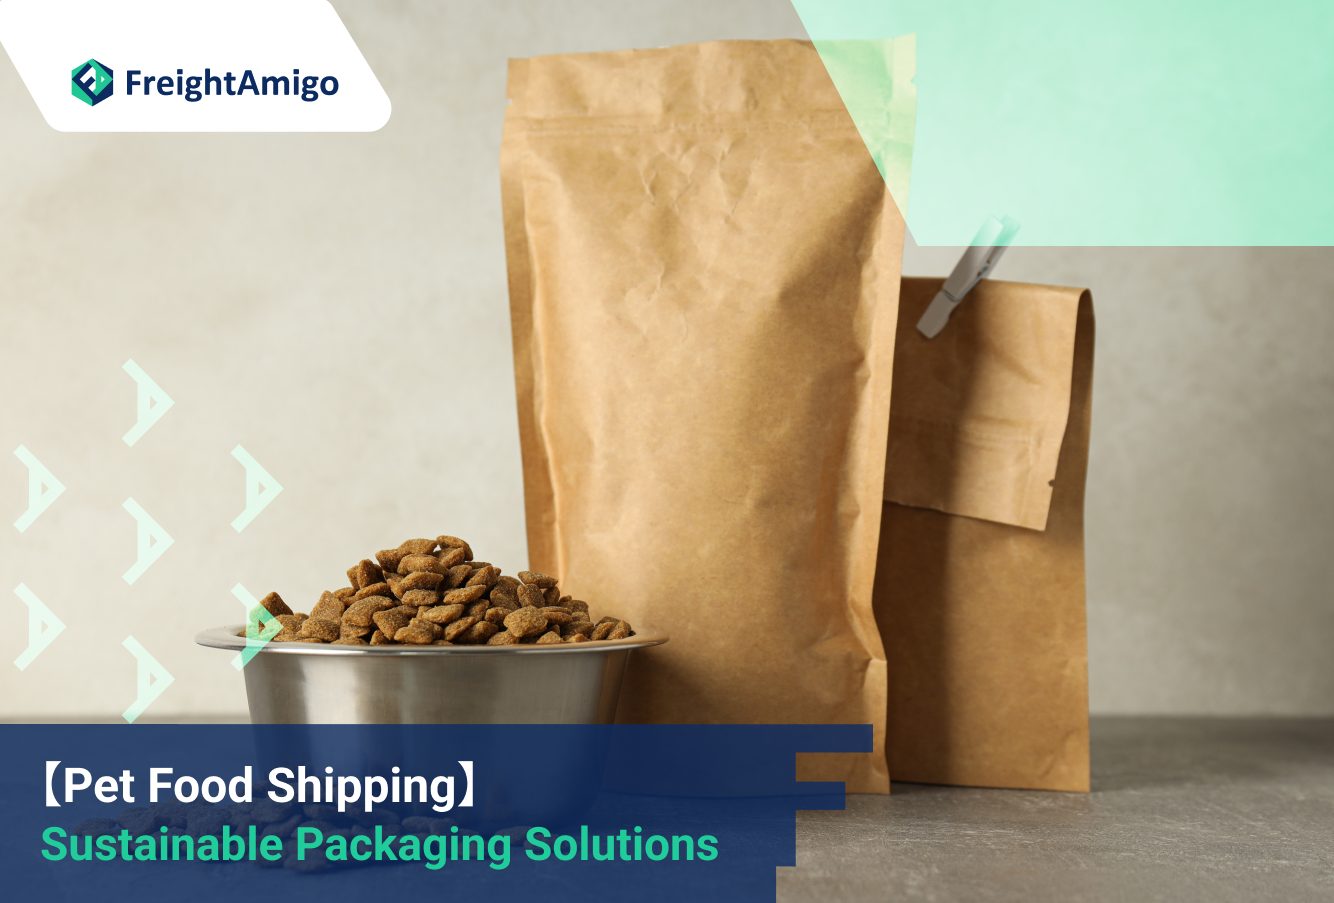 Sustainable Packaging Solutions for Pet Food Shipping